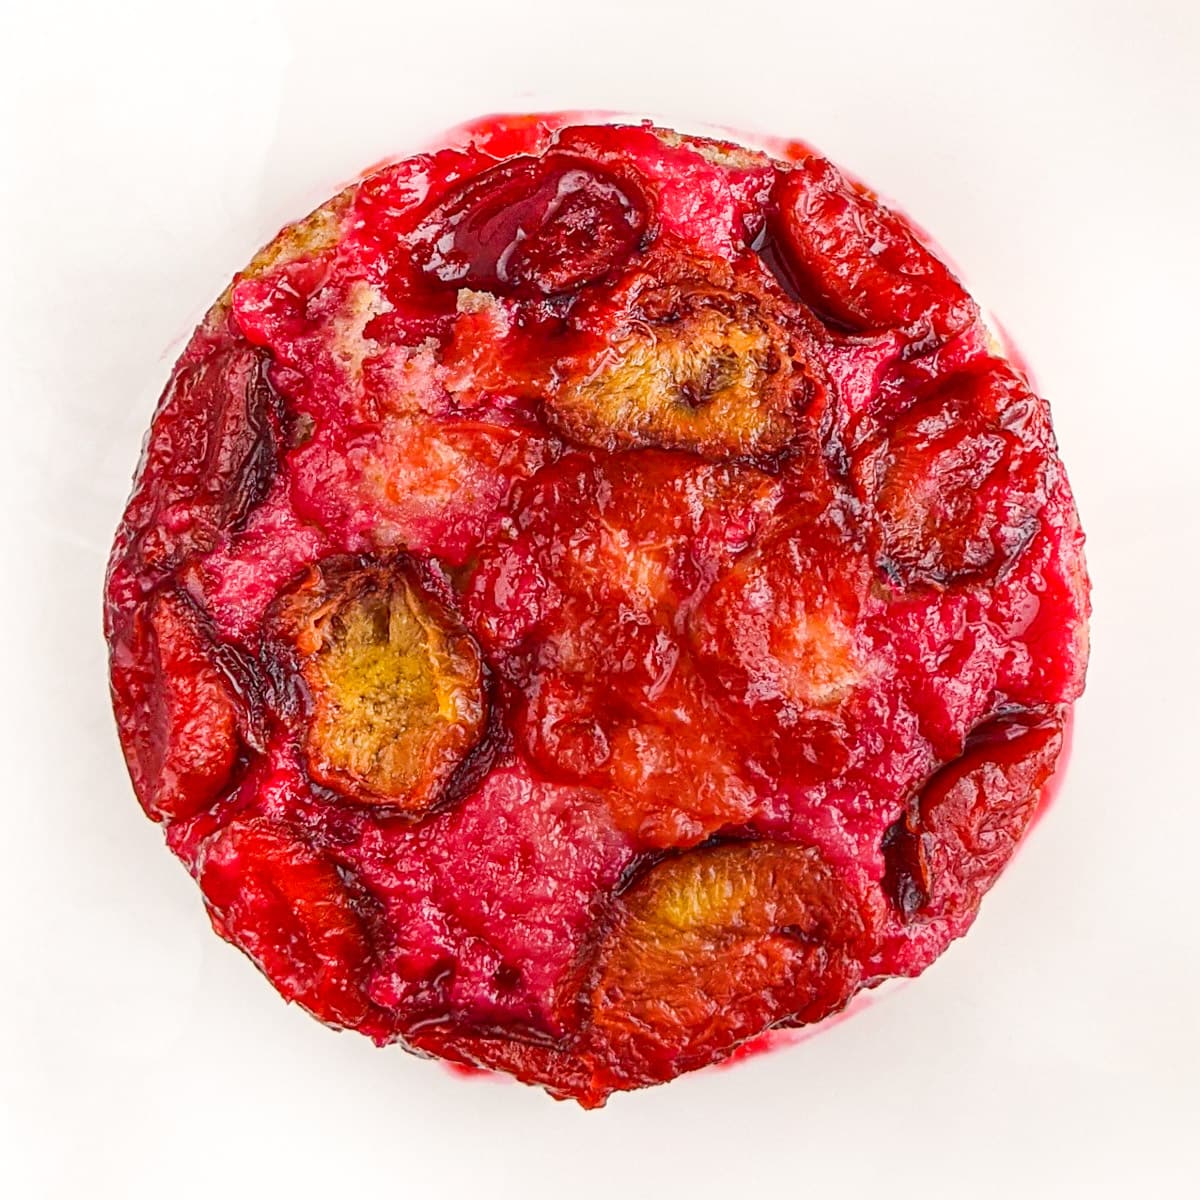 Top view of juicy plum cake on a white background.